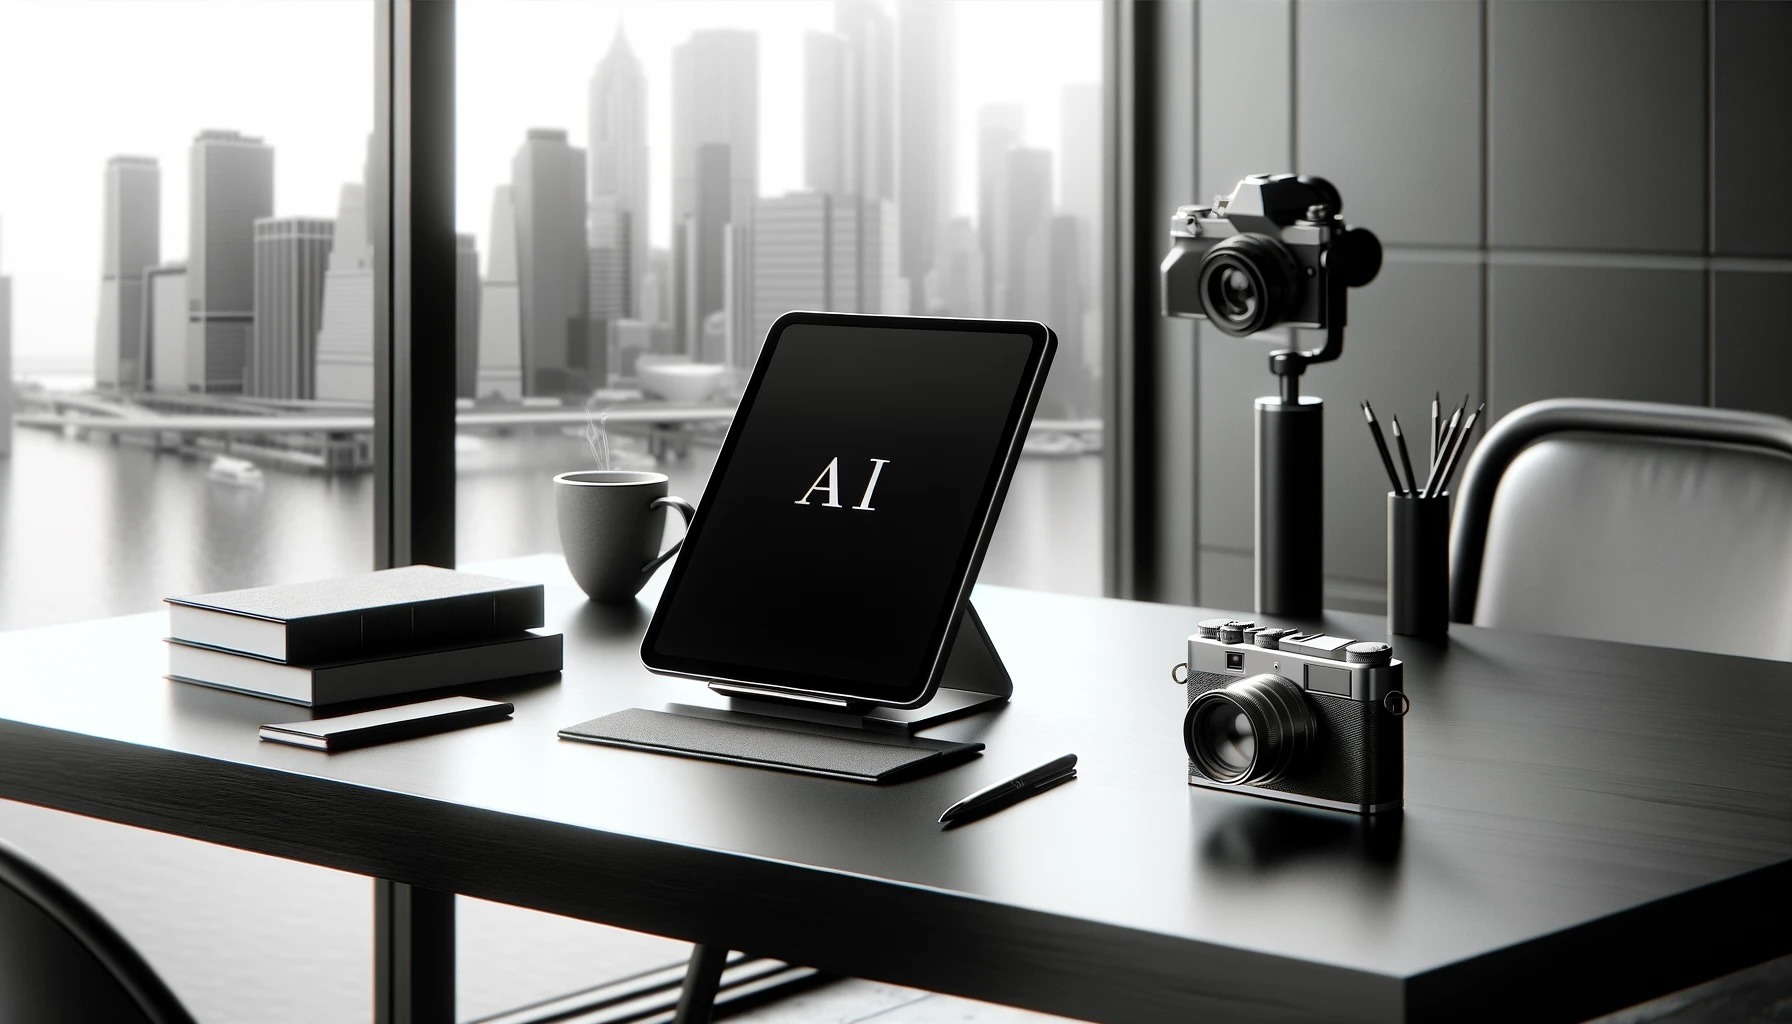 Here is the black and white wide image of a minimalist workspace at an AI automation agency, set up in a modern aesthetic with a sleek tablet on a stand, a camera, a cup of coffee, and a couple of hardcover books, near a window with a blurred cityscape background.